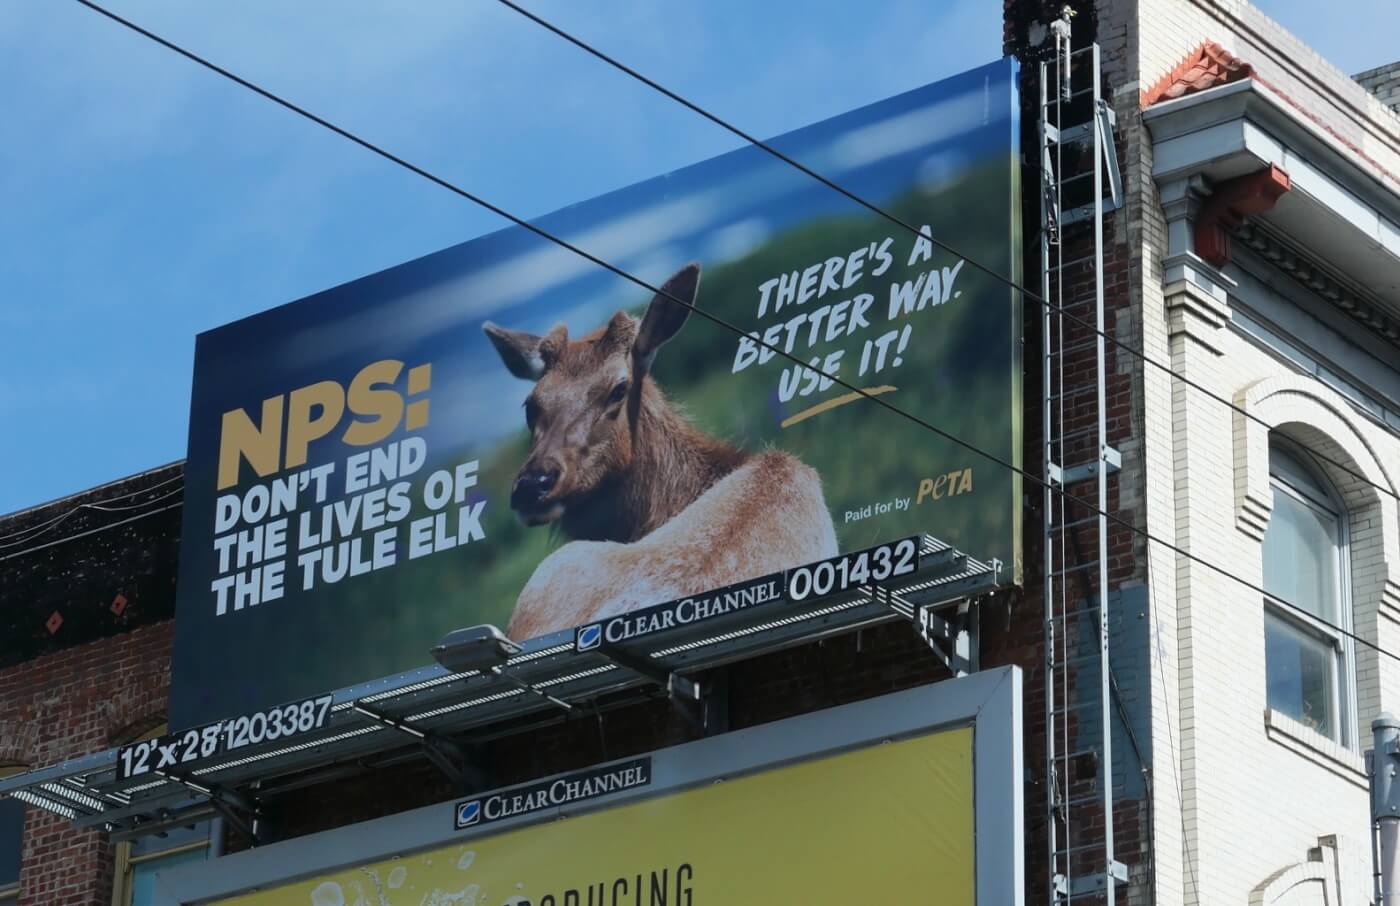 NPS: Don't End the Lives of the Tule Elk ad in San Francisco